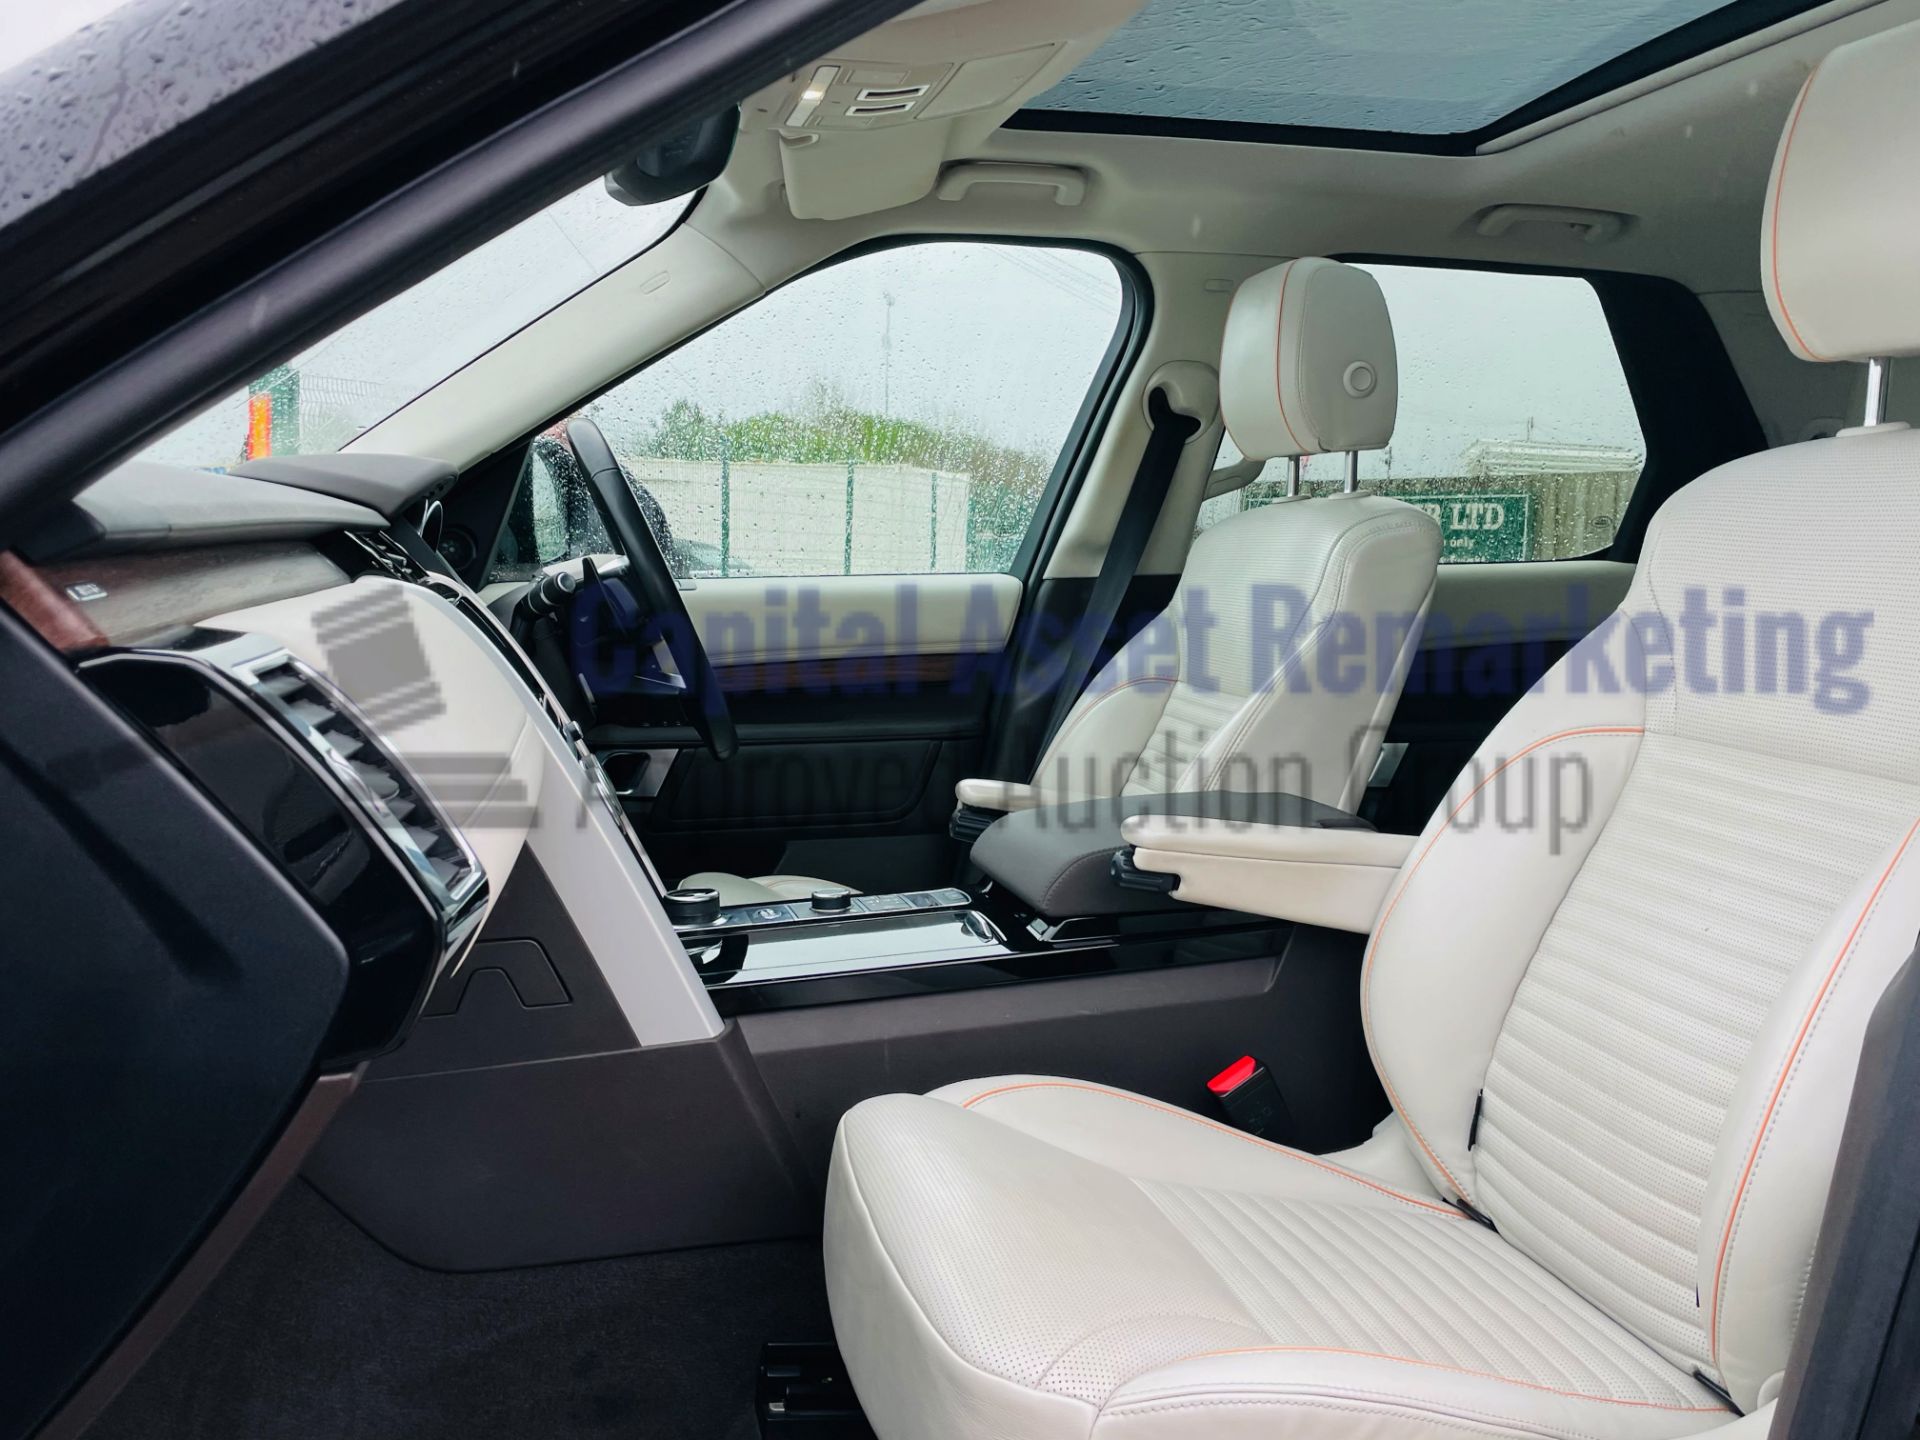 LAND ROVER DISCOVERY 5 *HSE EDITION* 7 SEATER SUV (2017 EURO 6) 8 SPEED AUTO - PAN ROOF *HUGE SPEC* - Image 26 of 64